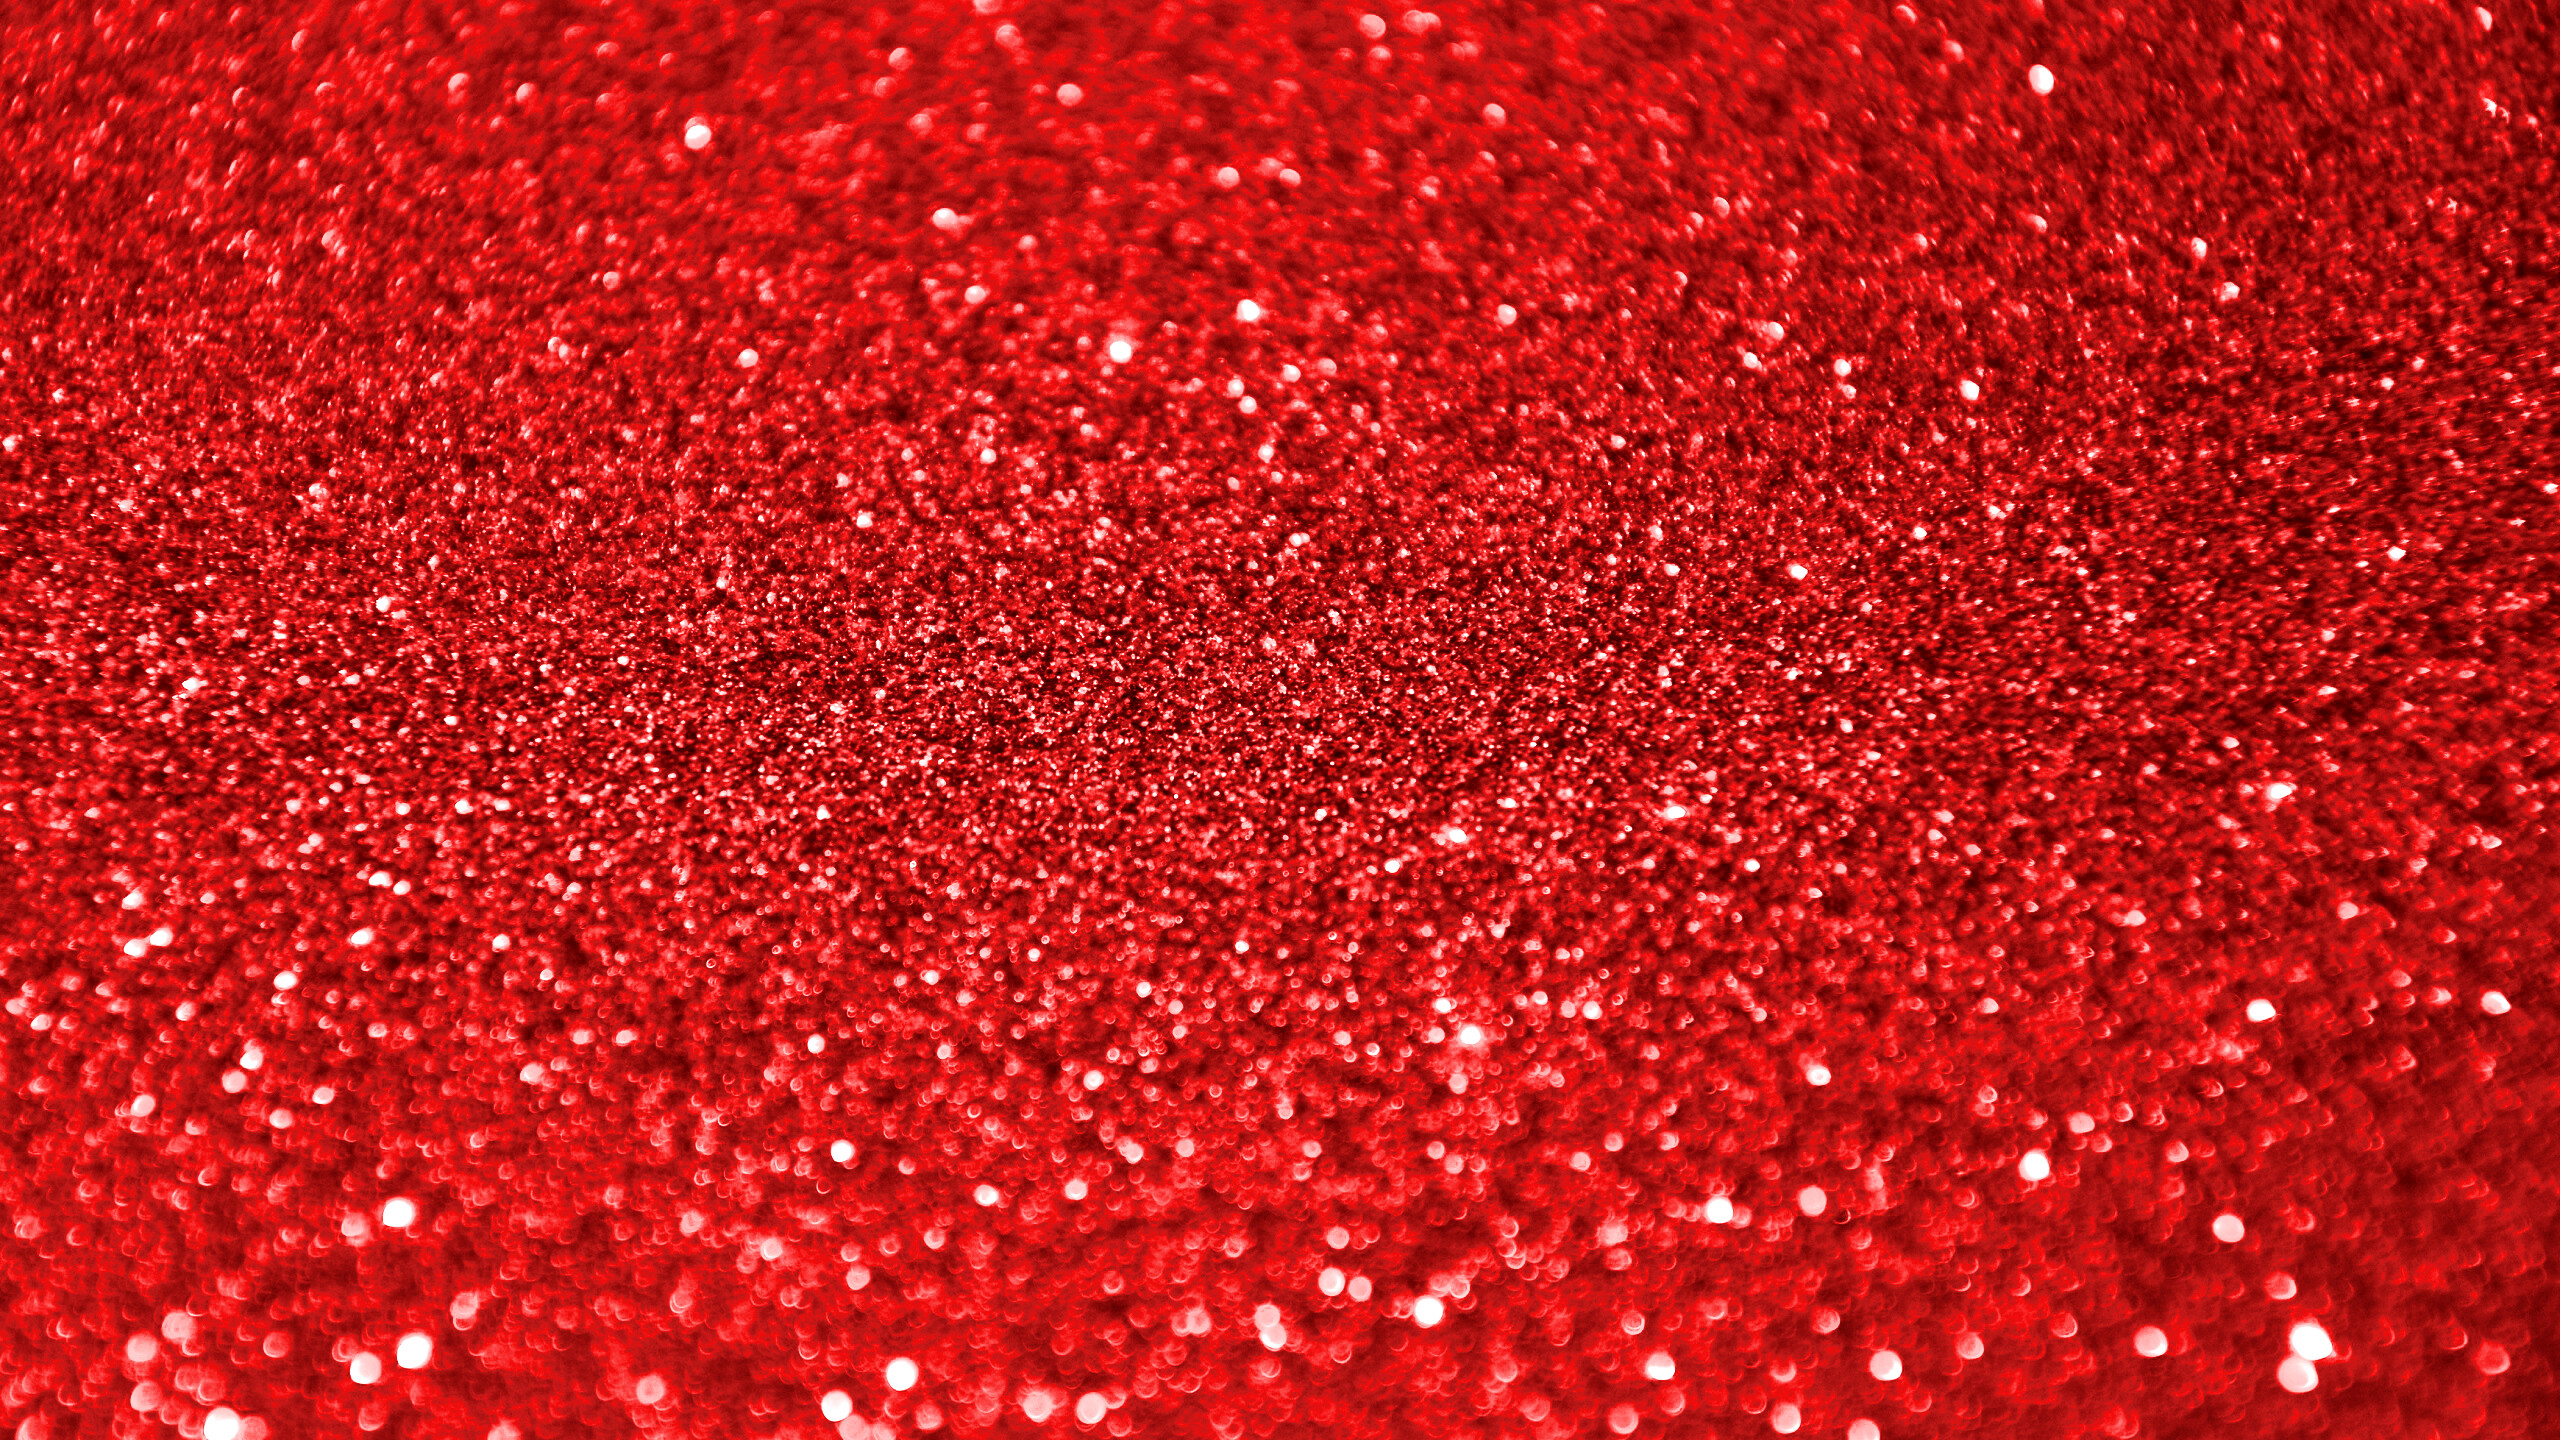 Sparkle: Glitter, Used for temporary body art, like face painting. 2560x1440 HD Wallpaper.